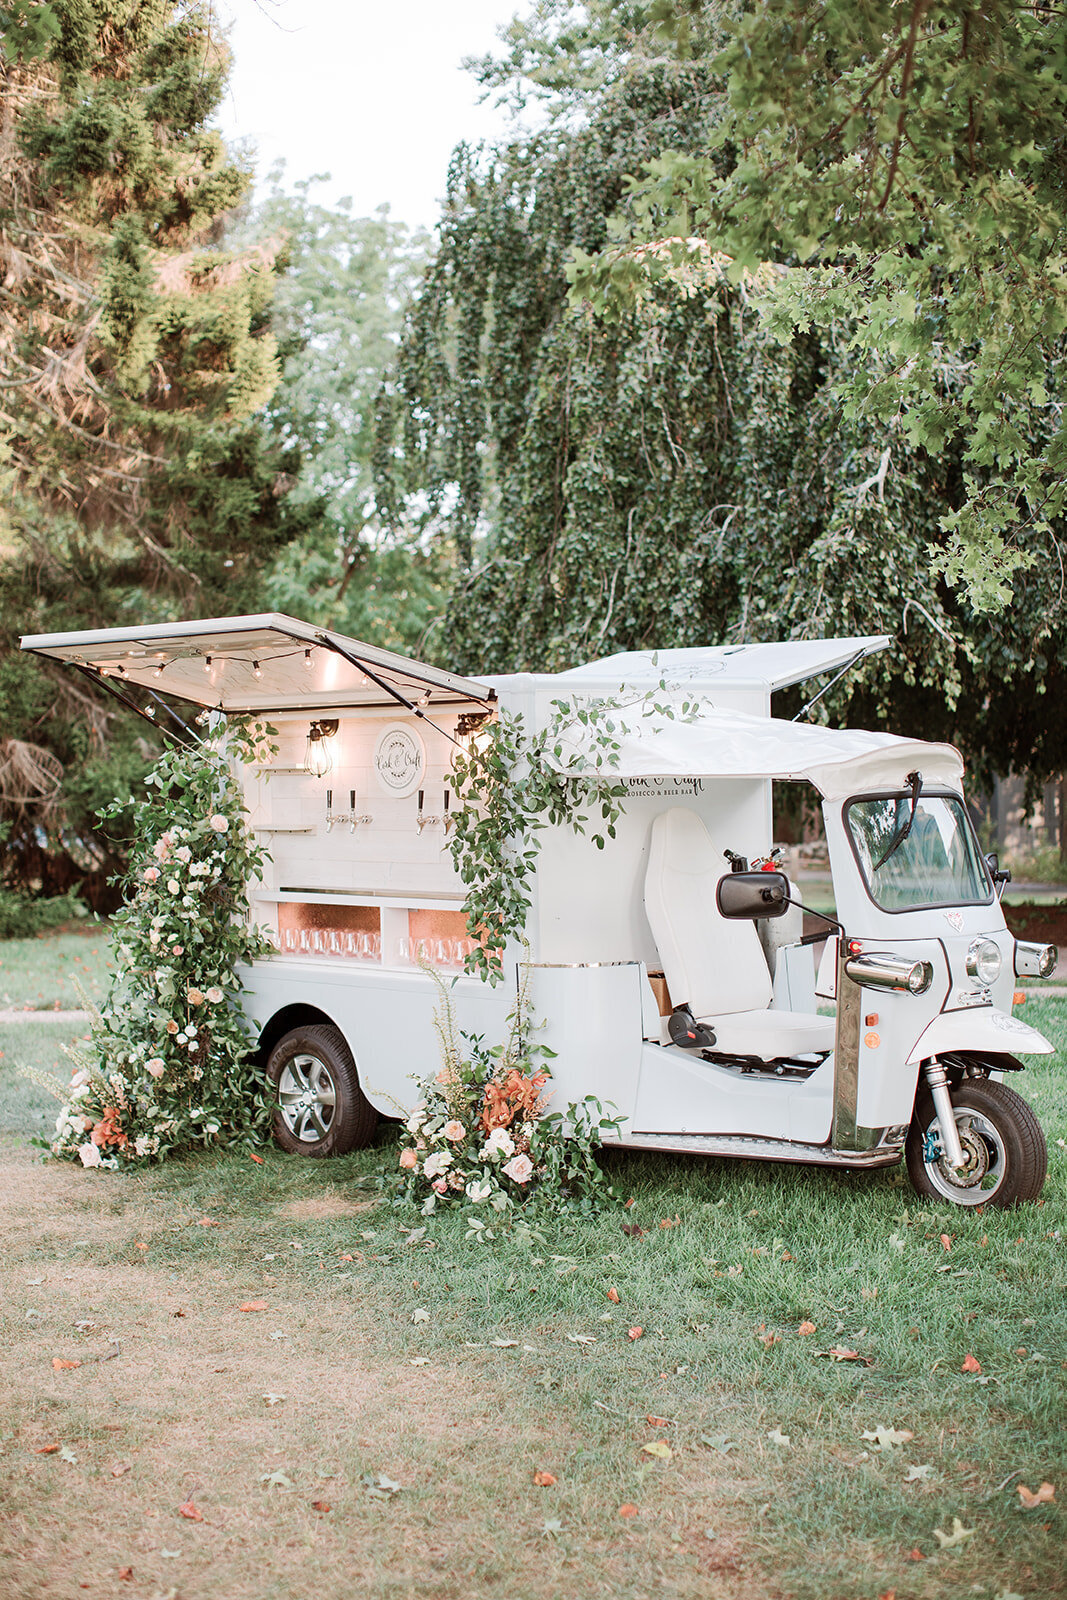 Moped style mobile bar decorated with florals